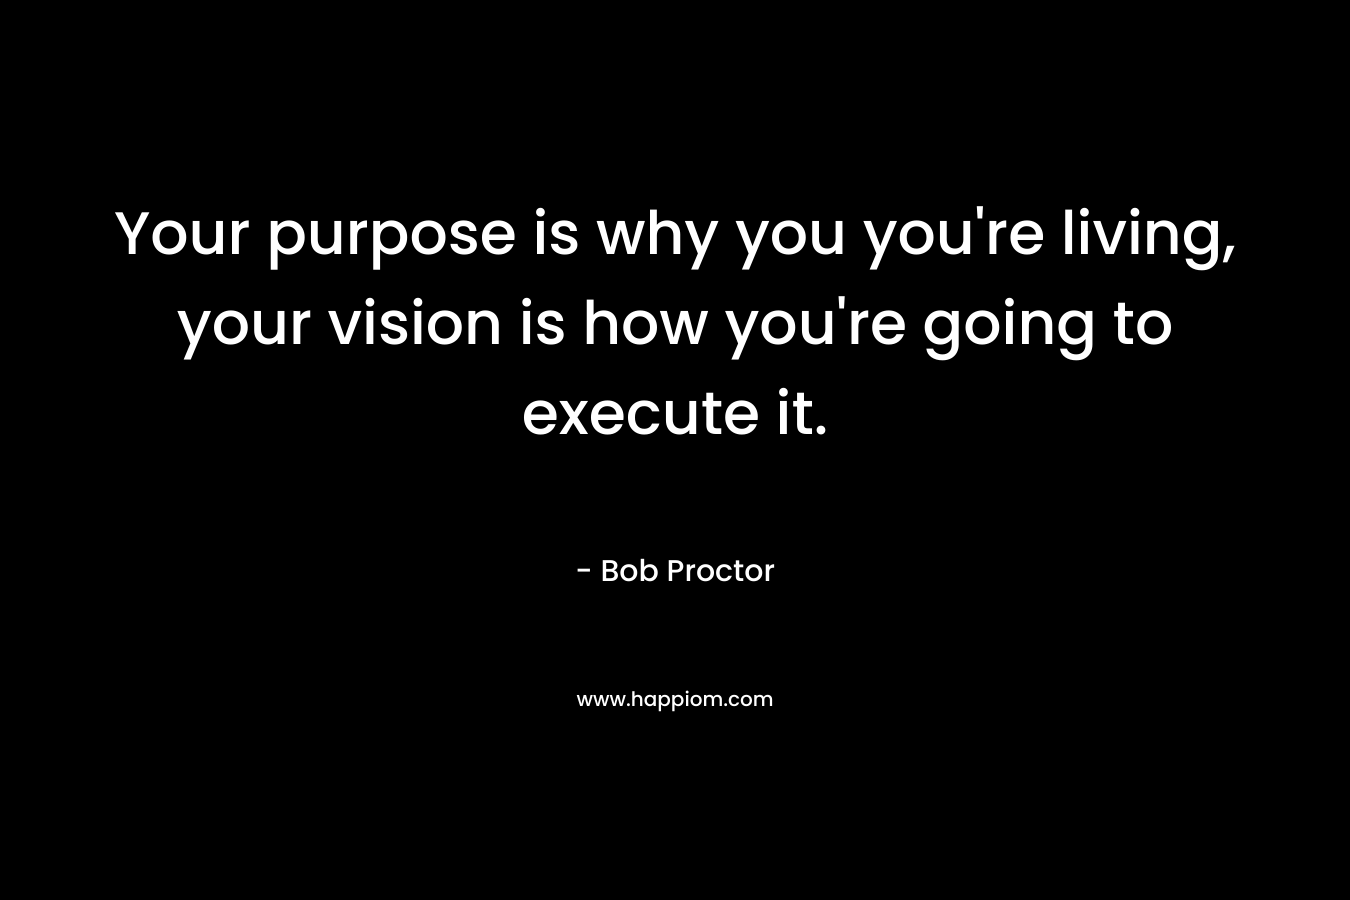 Your purpose is why you you're living, your vision is how you're going to execute it.